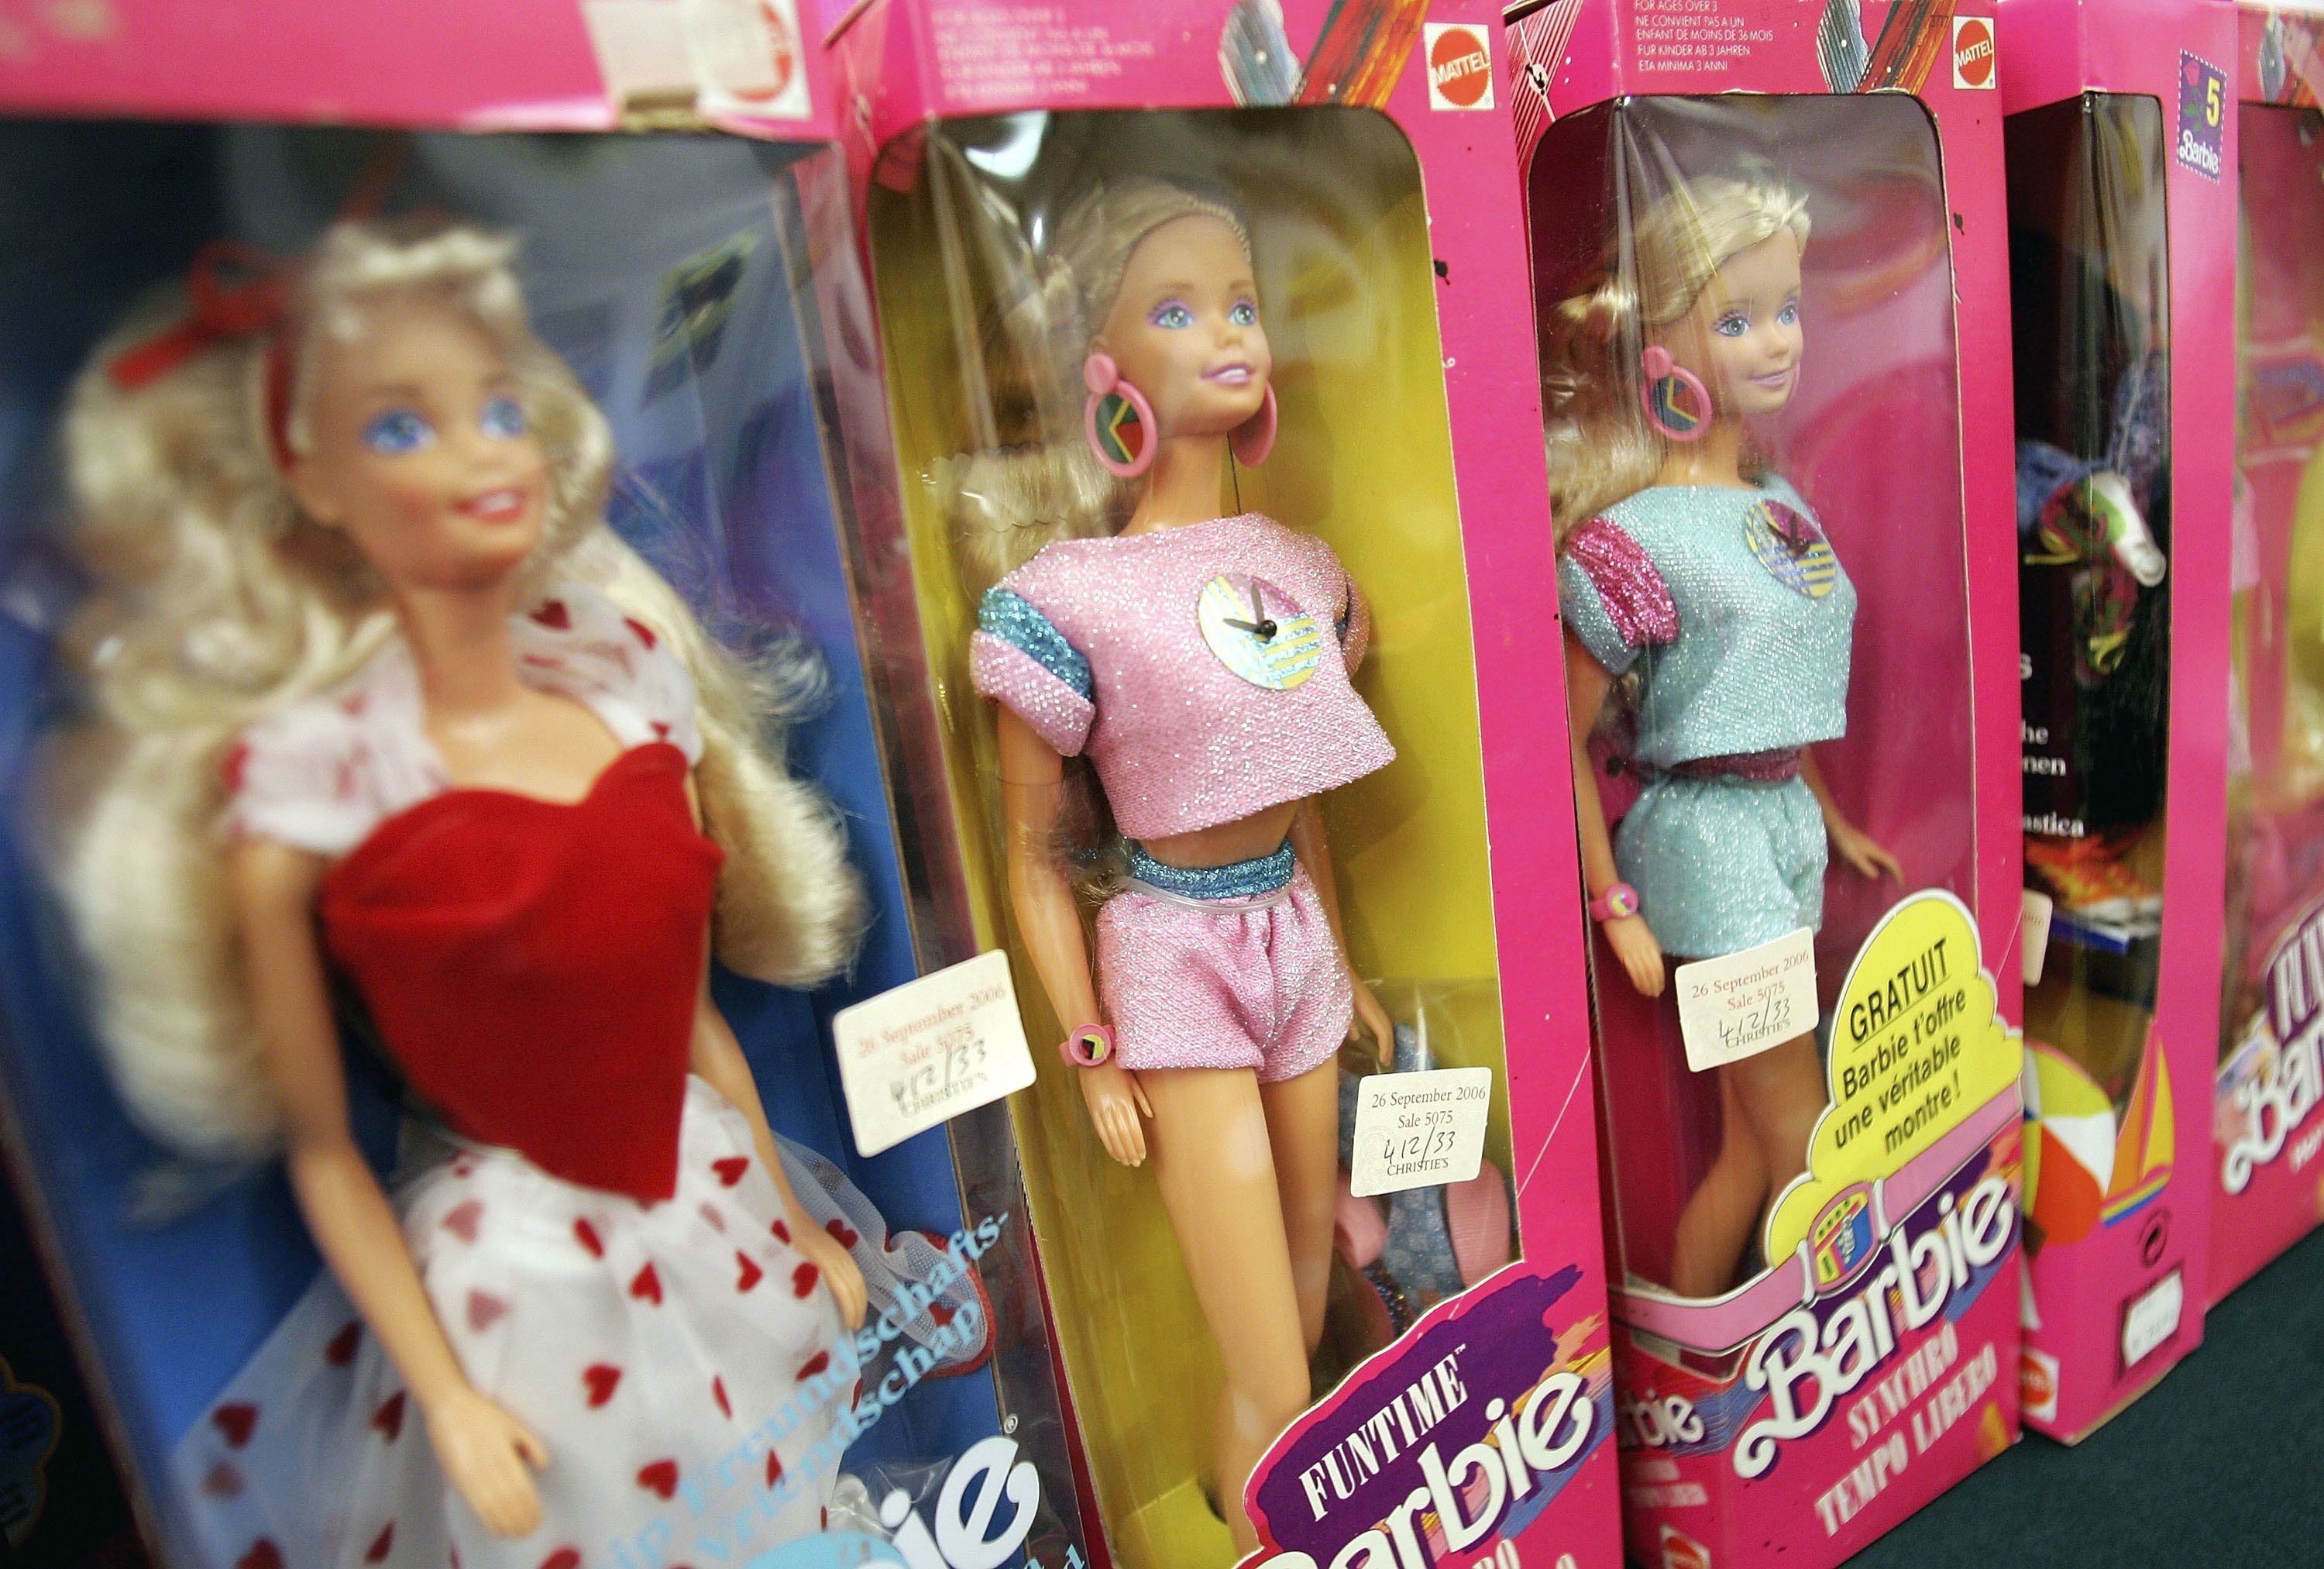 Don't think I've said here, but my self-insert Barbie has a padded